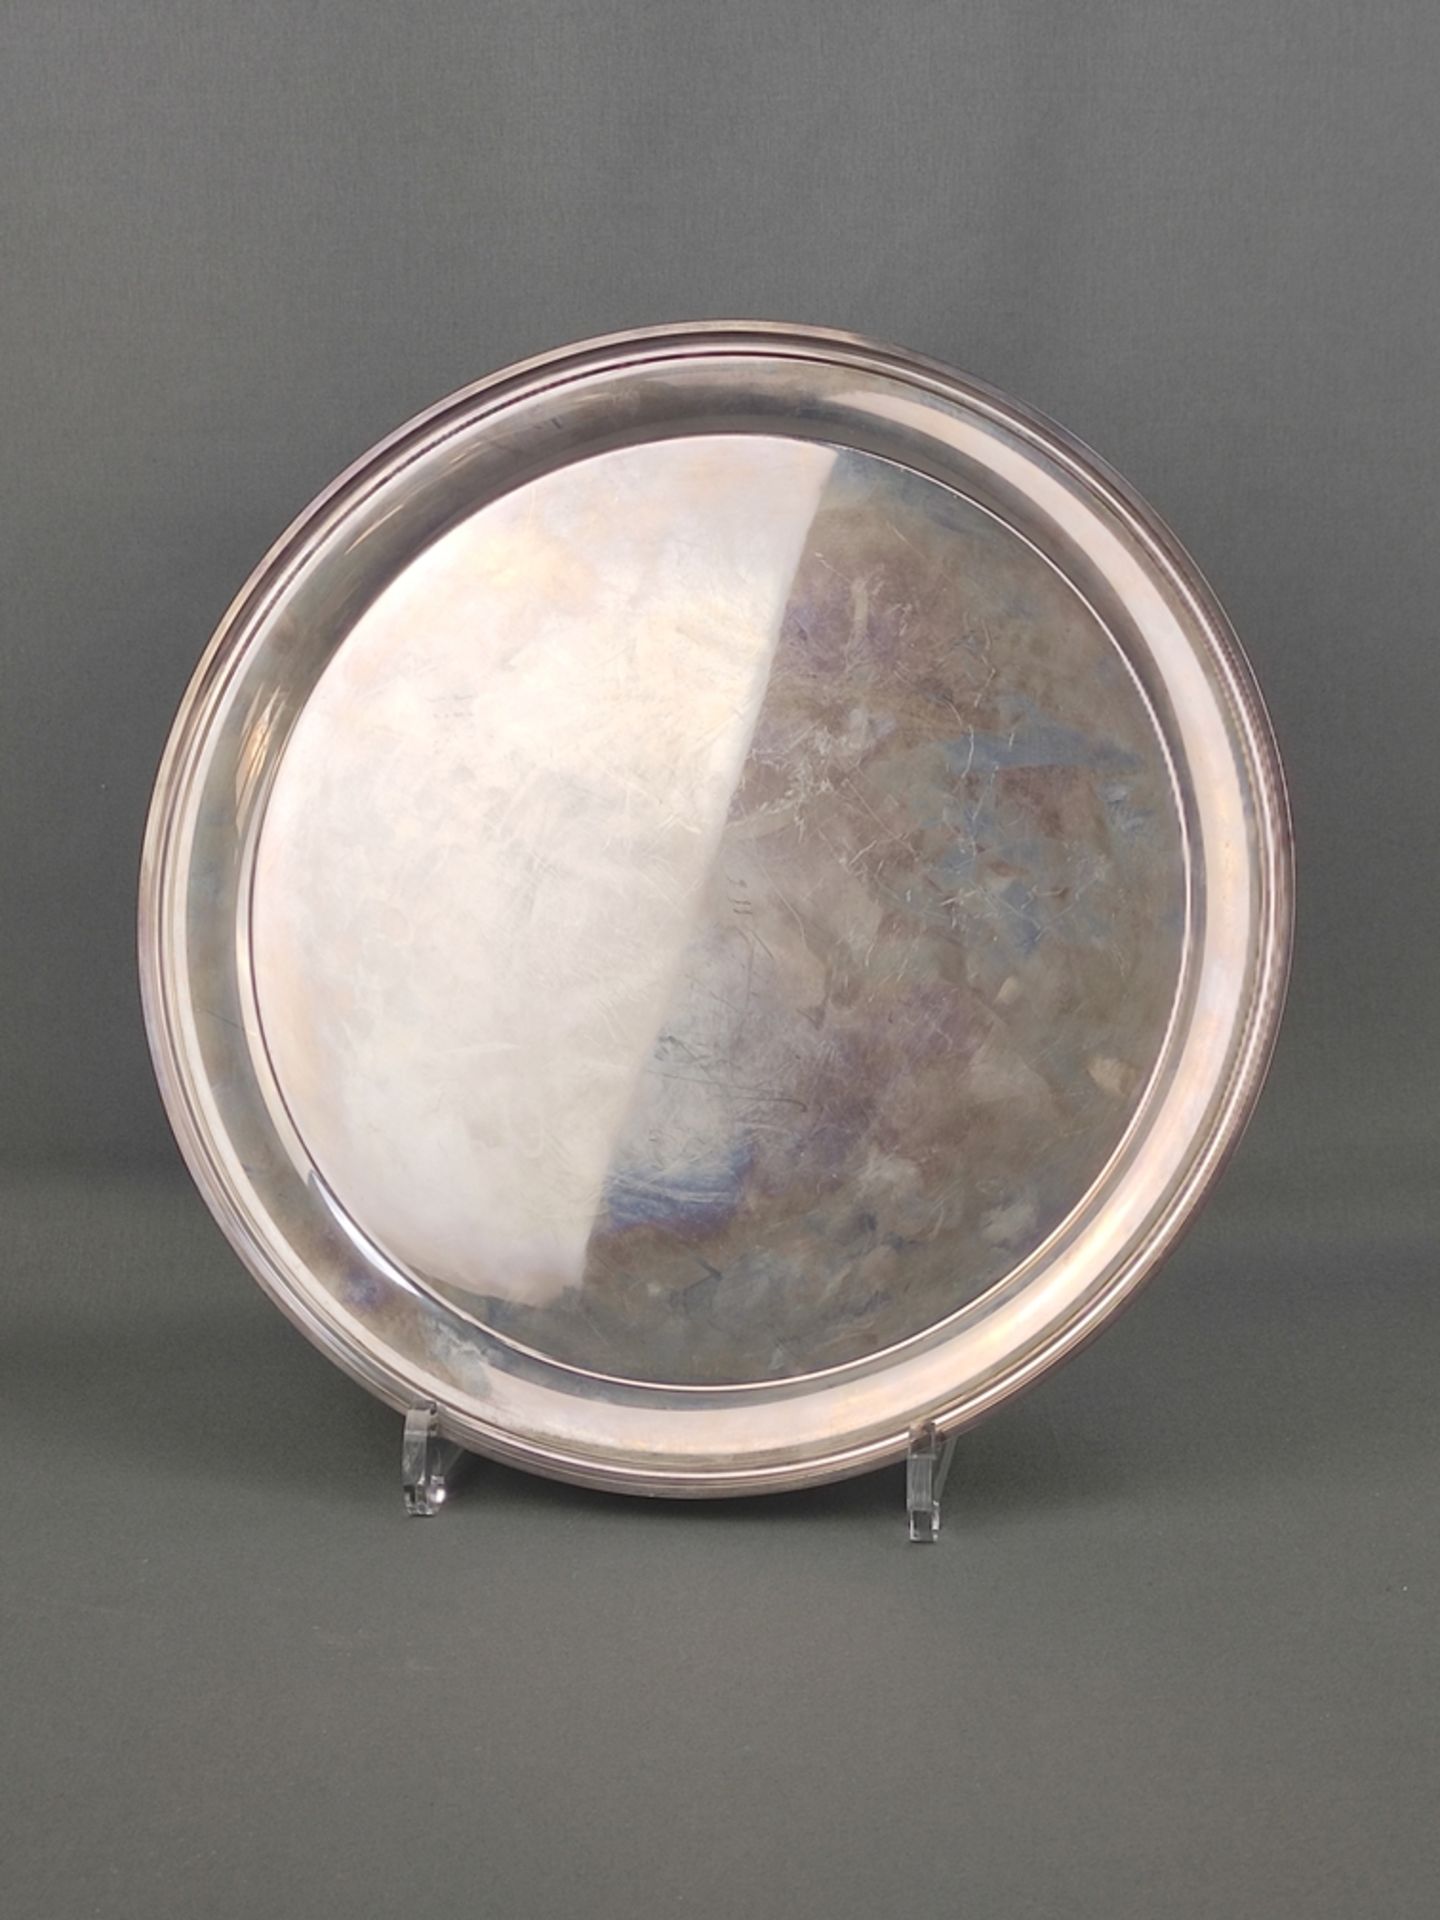 Silver tray, sterling silver, 773g, USA, S. Kirk and Son, model no. 4112, diameter 30.5cm